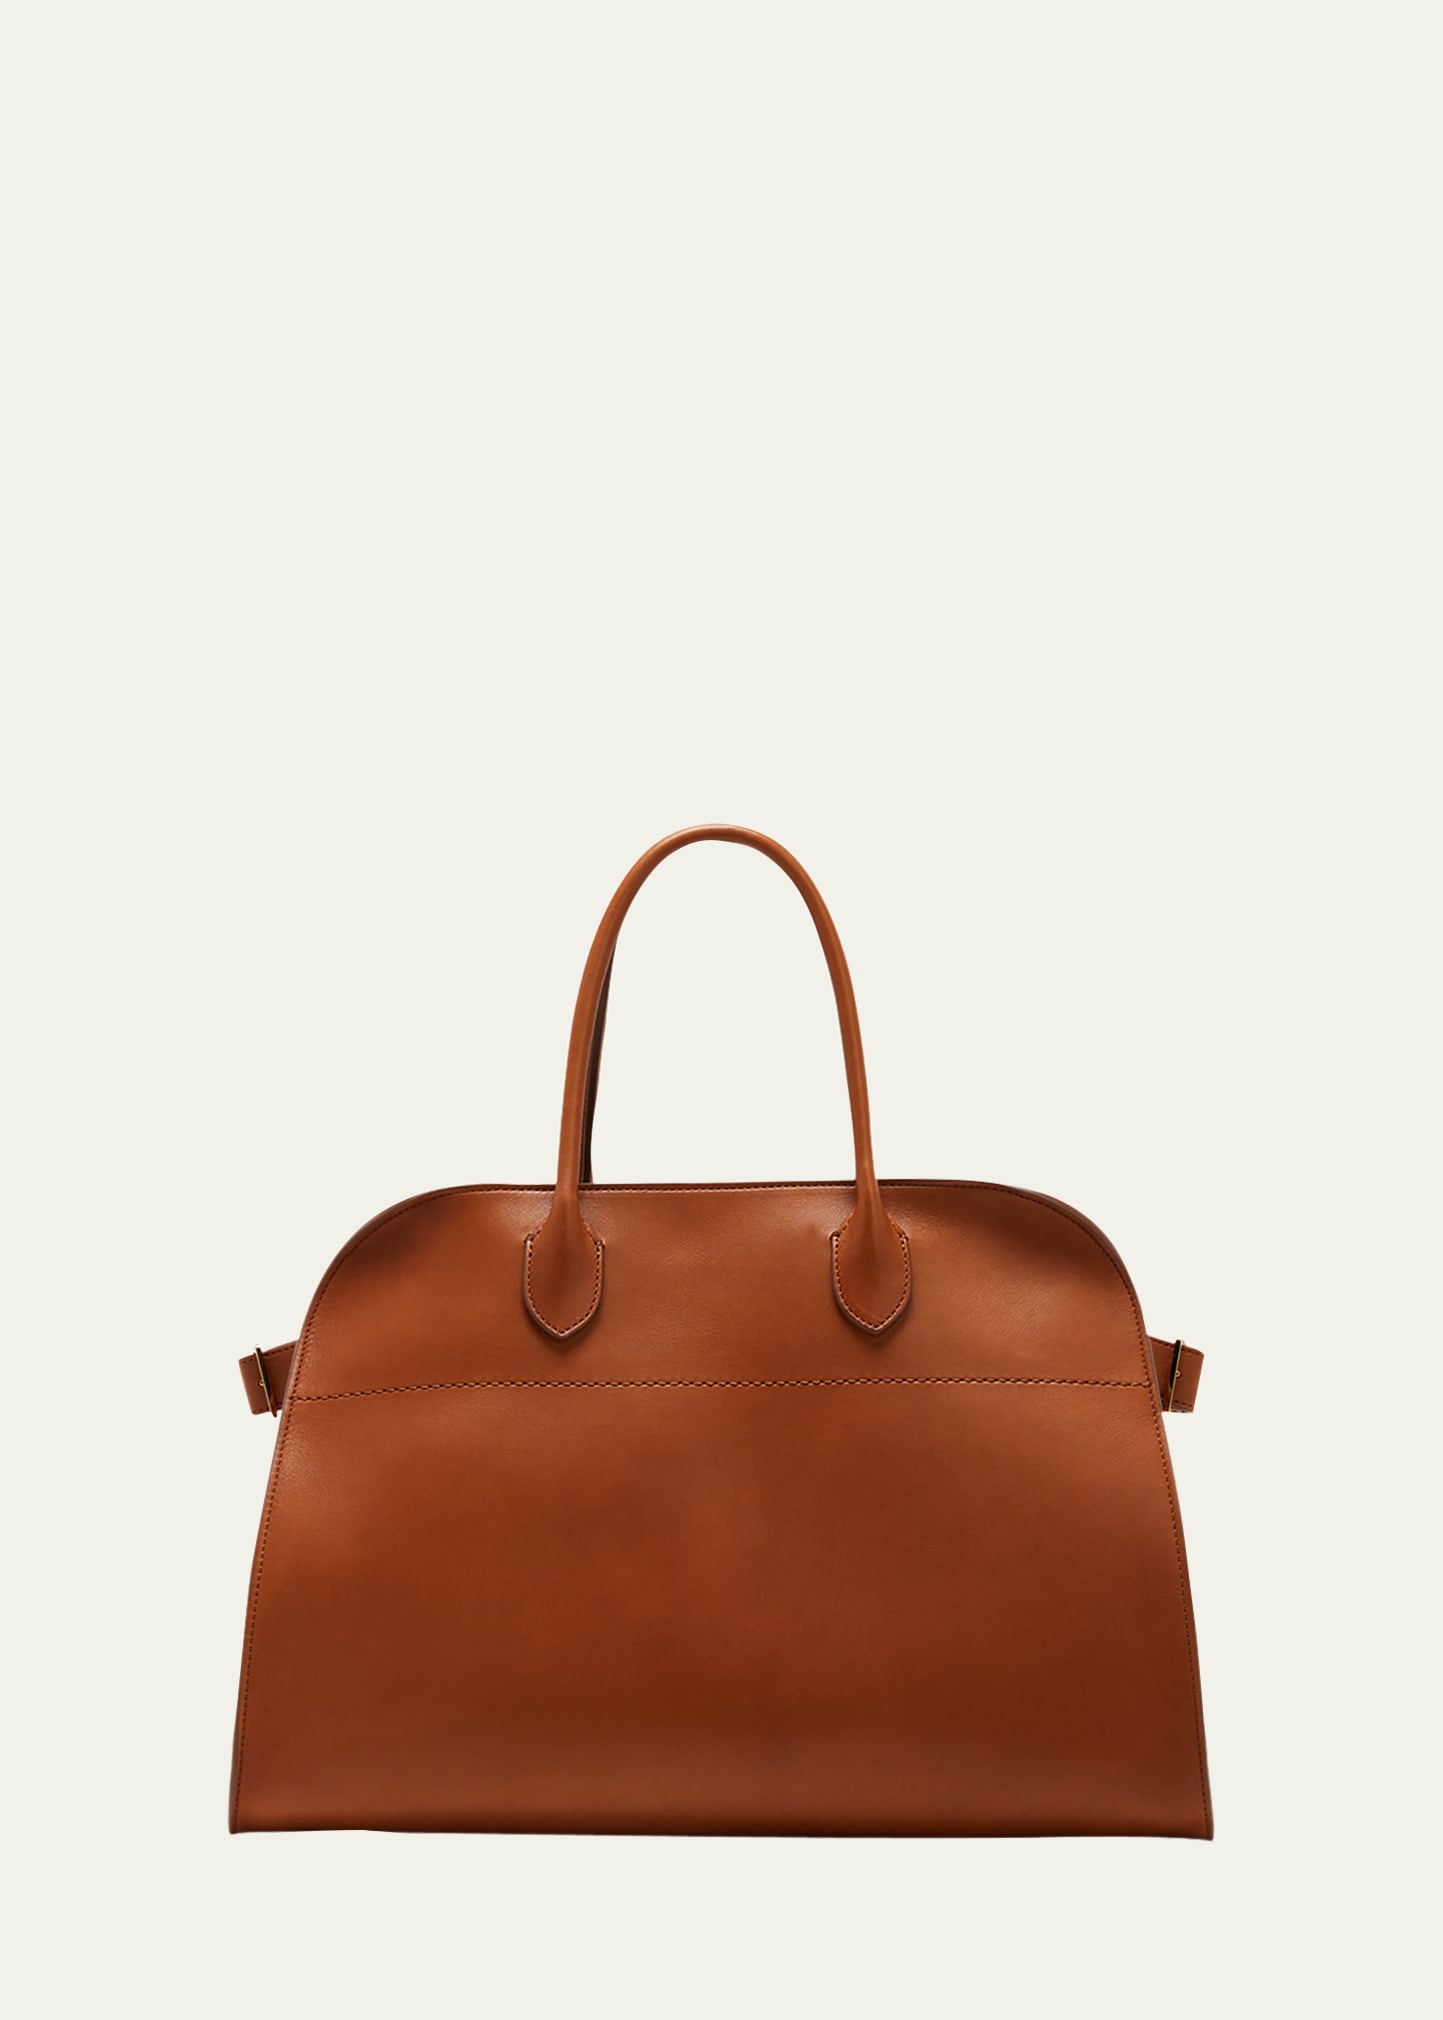 The Row Margaux 15 Air Bag In Calfskin Leather In Saddle